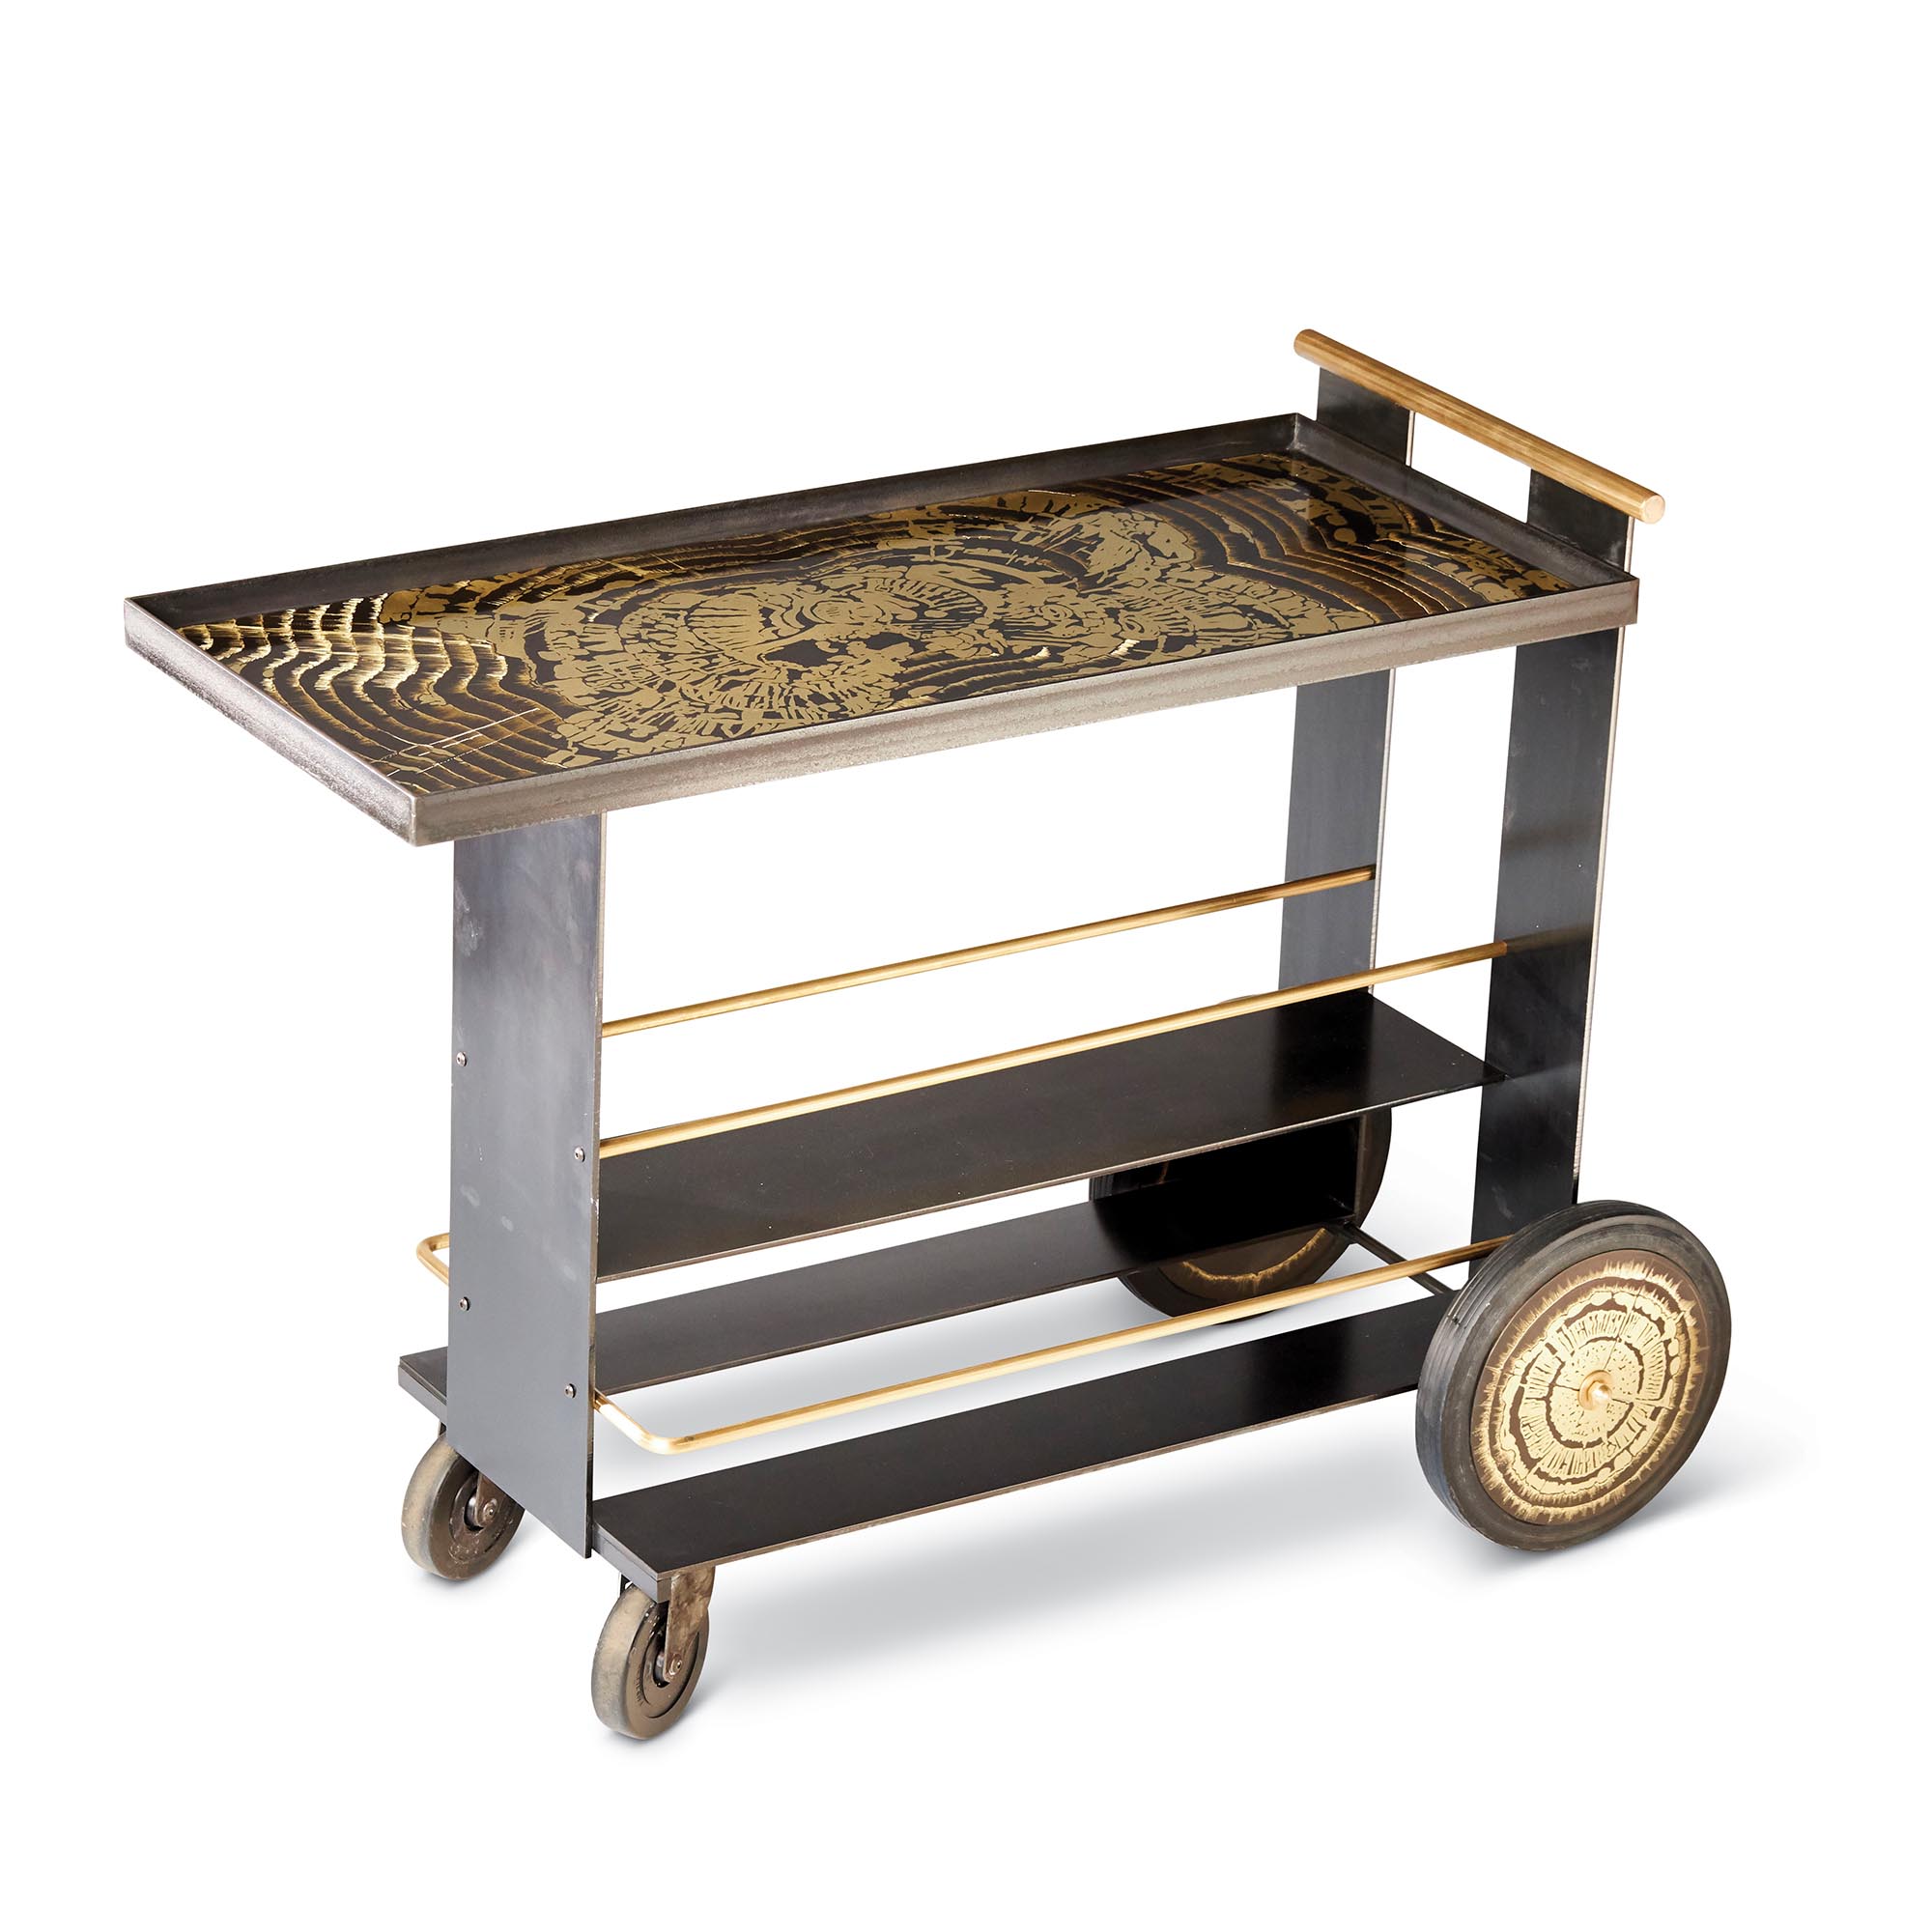 Tuell and Reynolds - Hohla Bar Cart